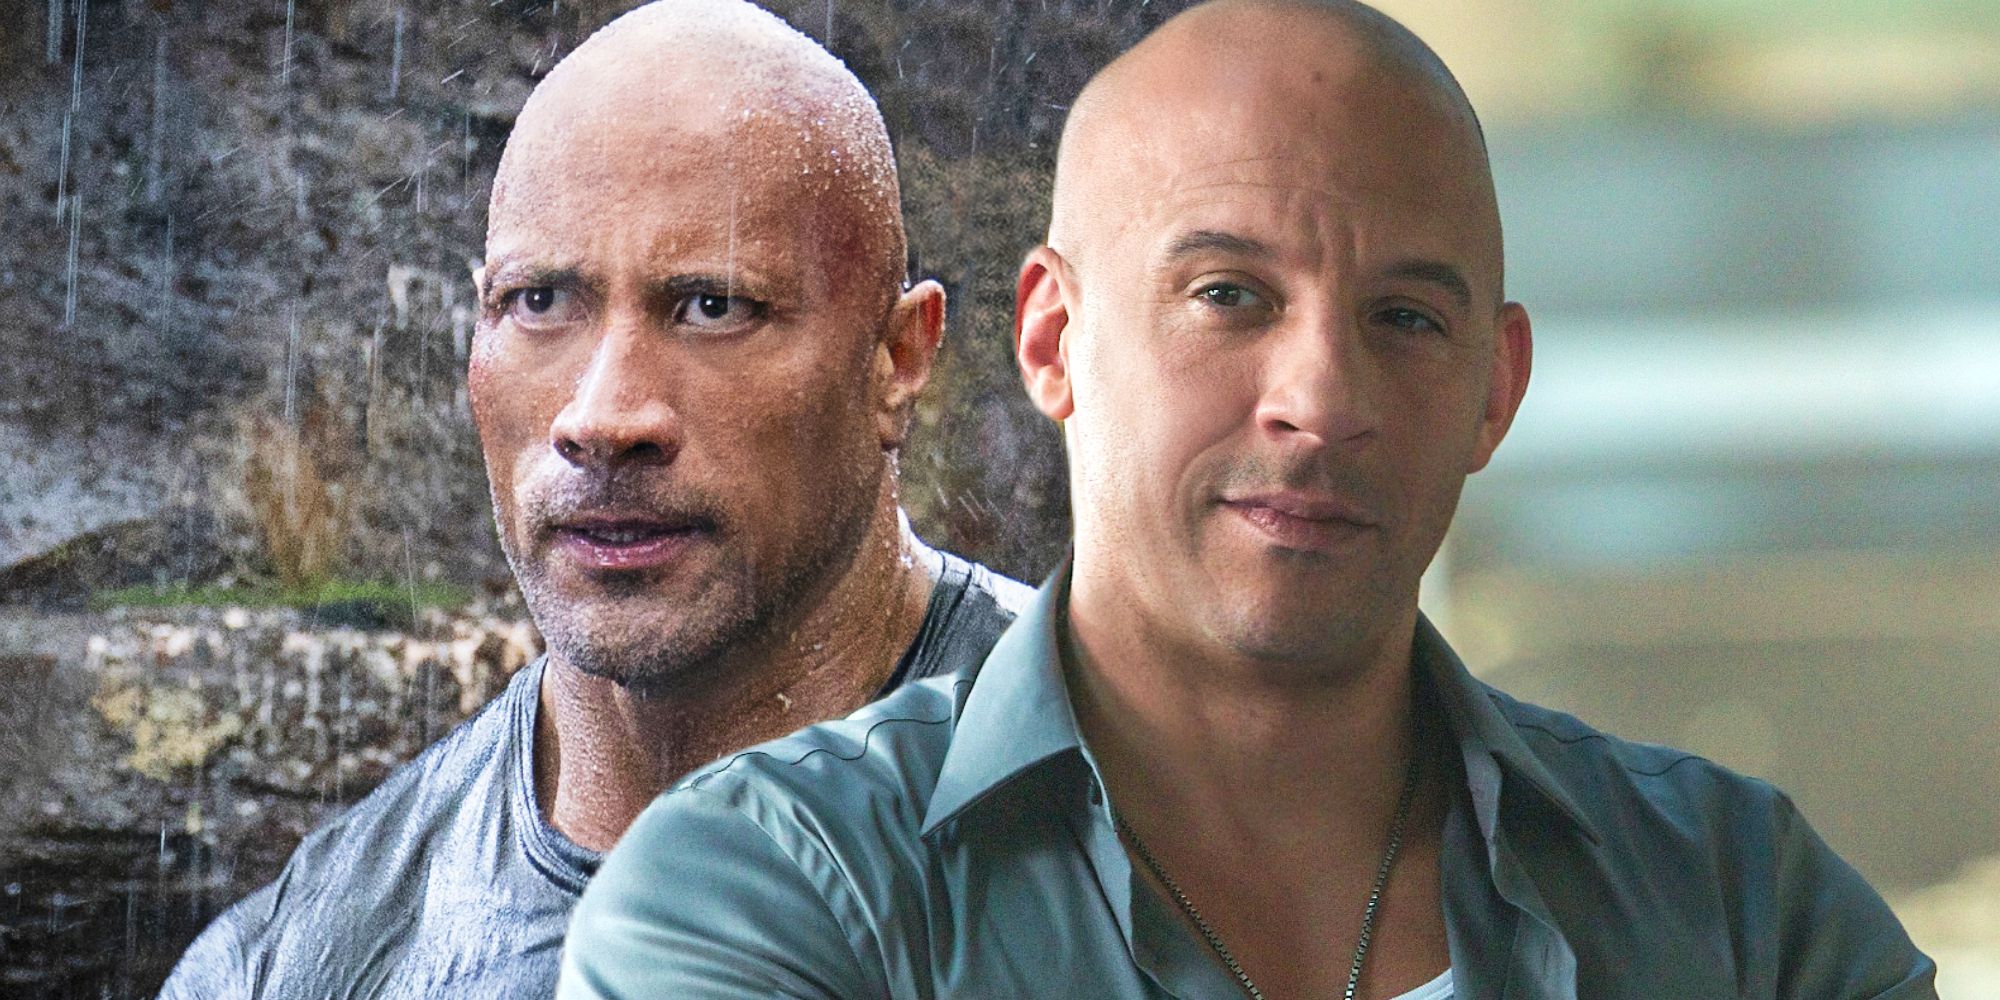 The Rock as Hobbs in Hobbs and Shaw and Vin Diesel as Toretto in Fast and Furious